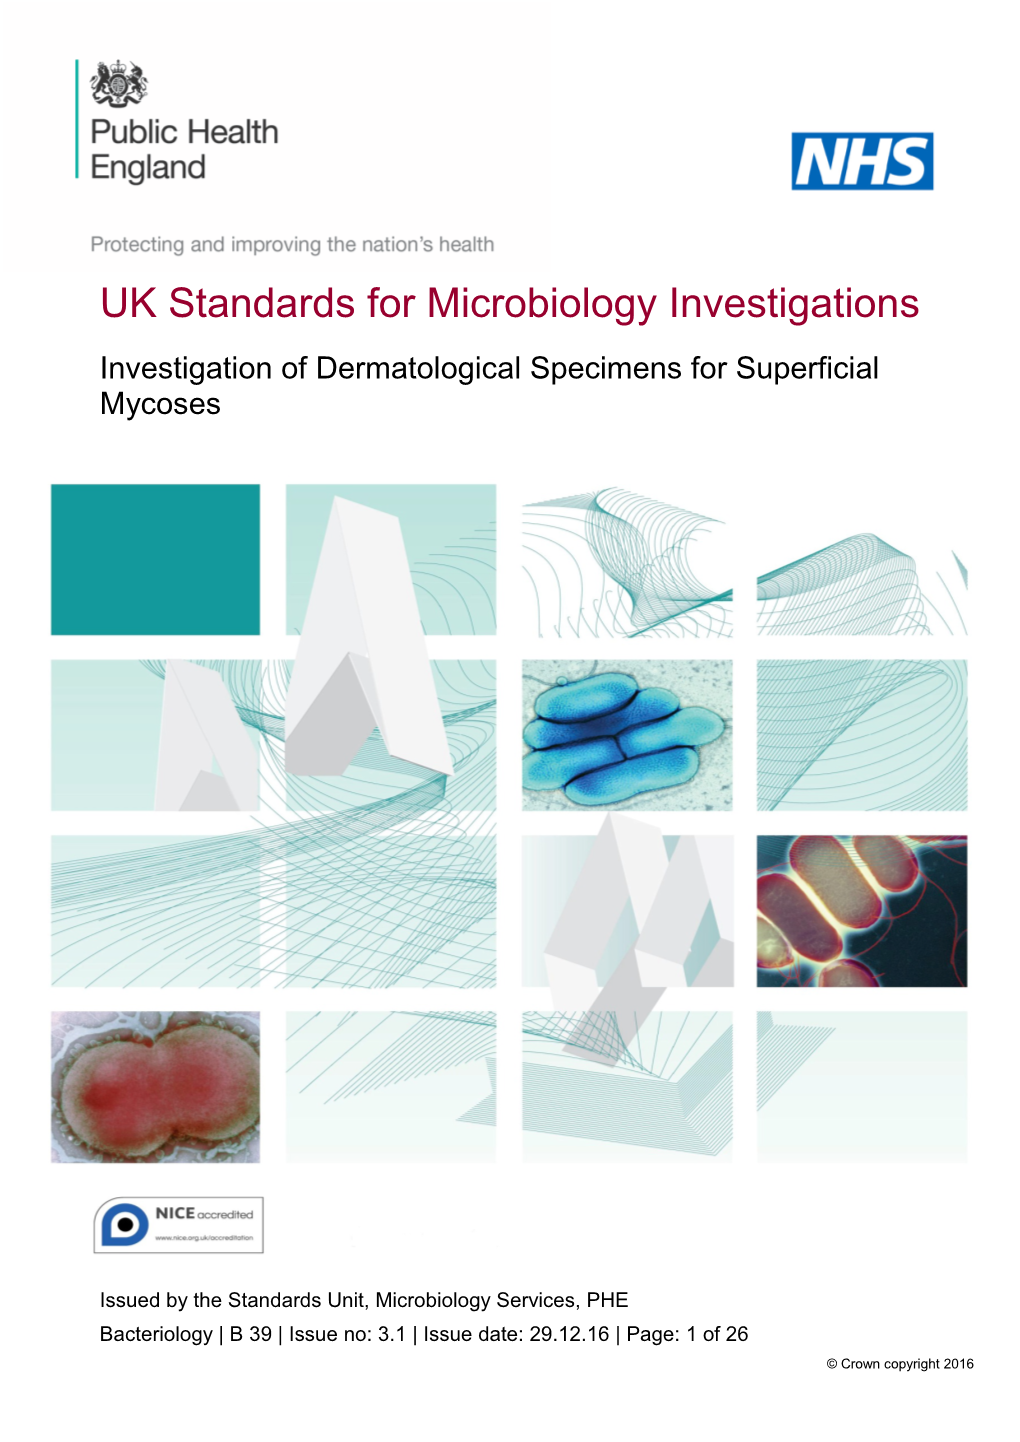 Investigation of Dermatological Specimens for Superficial Mycoses